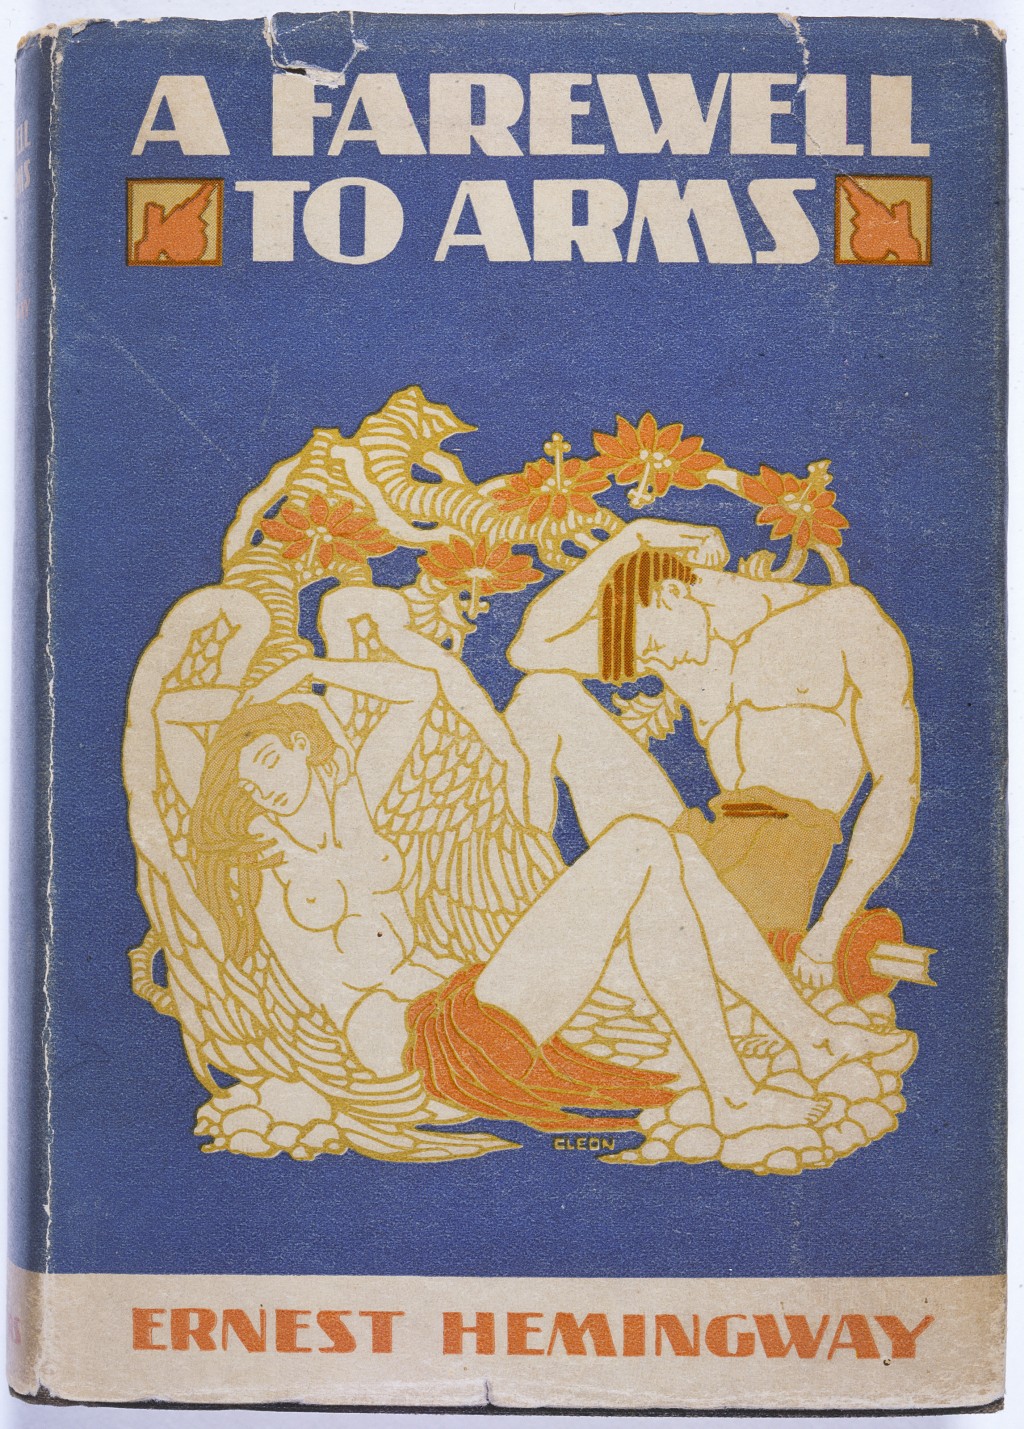 <p>Cover of Ernest Hemingway's  <em>A Farewell to Arms. </em>(1929 cover. Princeton University Library.)</p>
<p>In 1933, Nazi students at more than 30 German universities pillaged libraries in search of books they considered to be "un-German." Among the literary and political writings they threw into the flames during the <a href="/narrative/7631">book burning</a> were the works of Ernest Hemingway. </p>